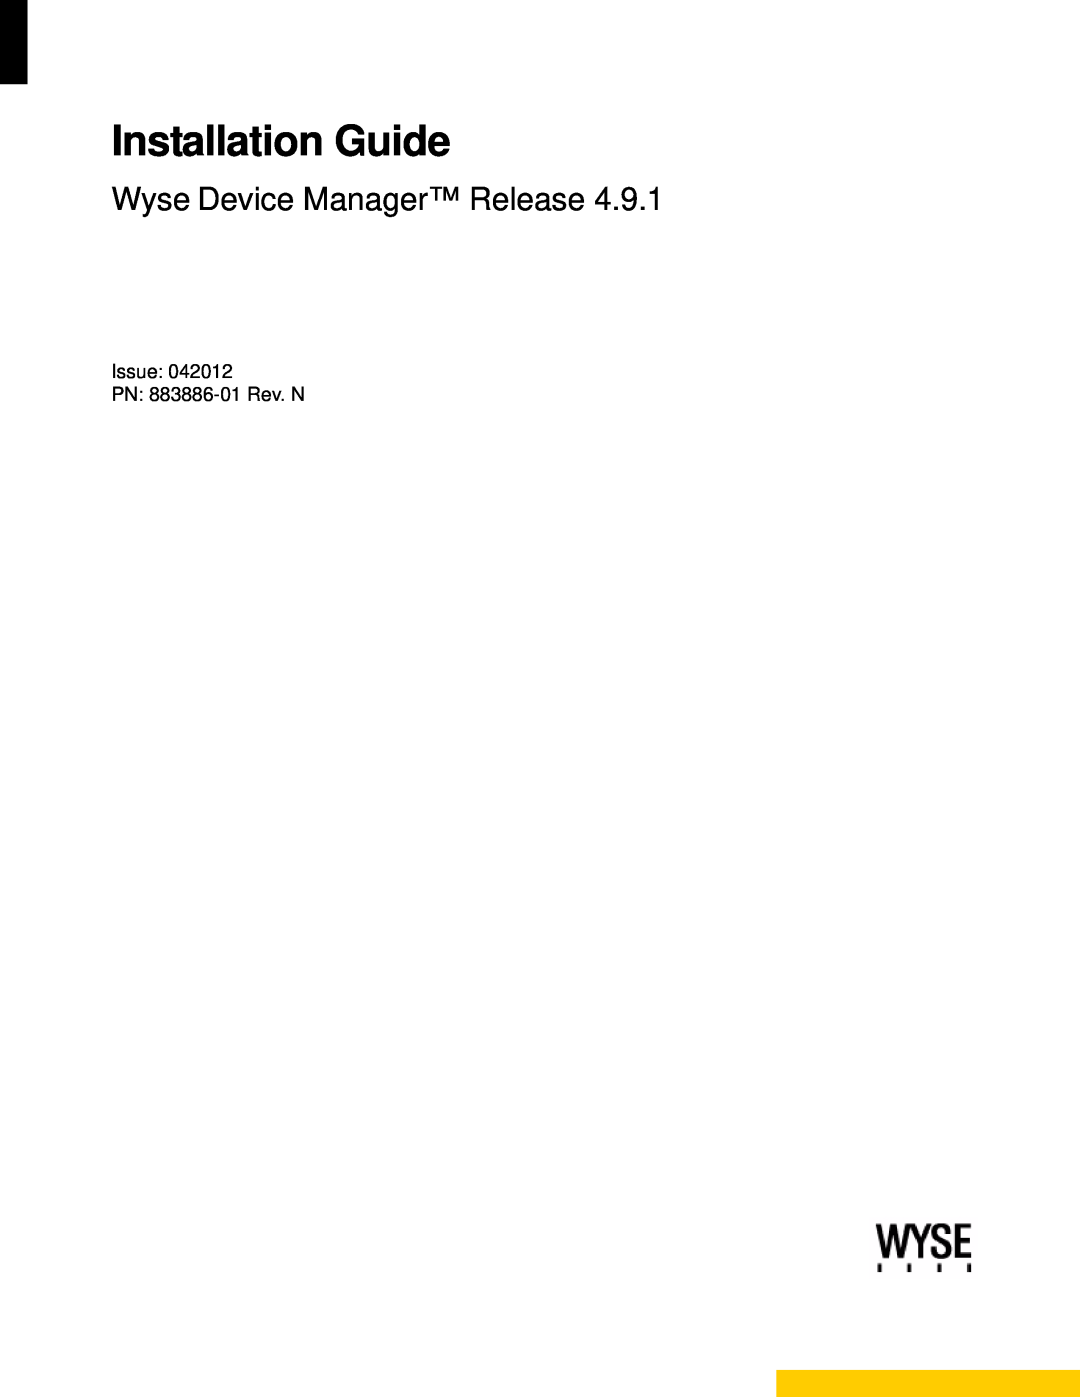 Wyse Technology manual Installation Guide, Wyse Device Manager Release, Issue PN 883886-01 Rev. N 